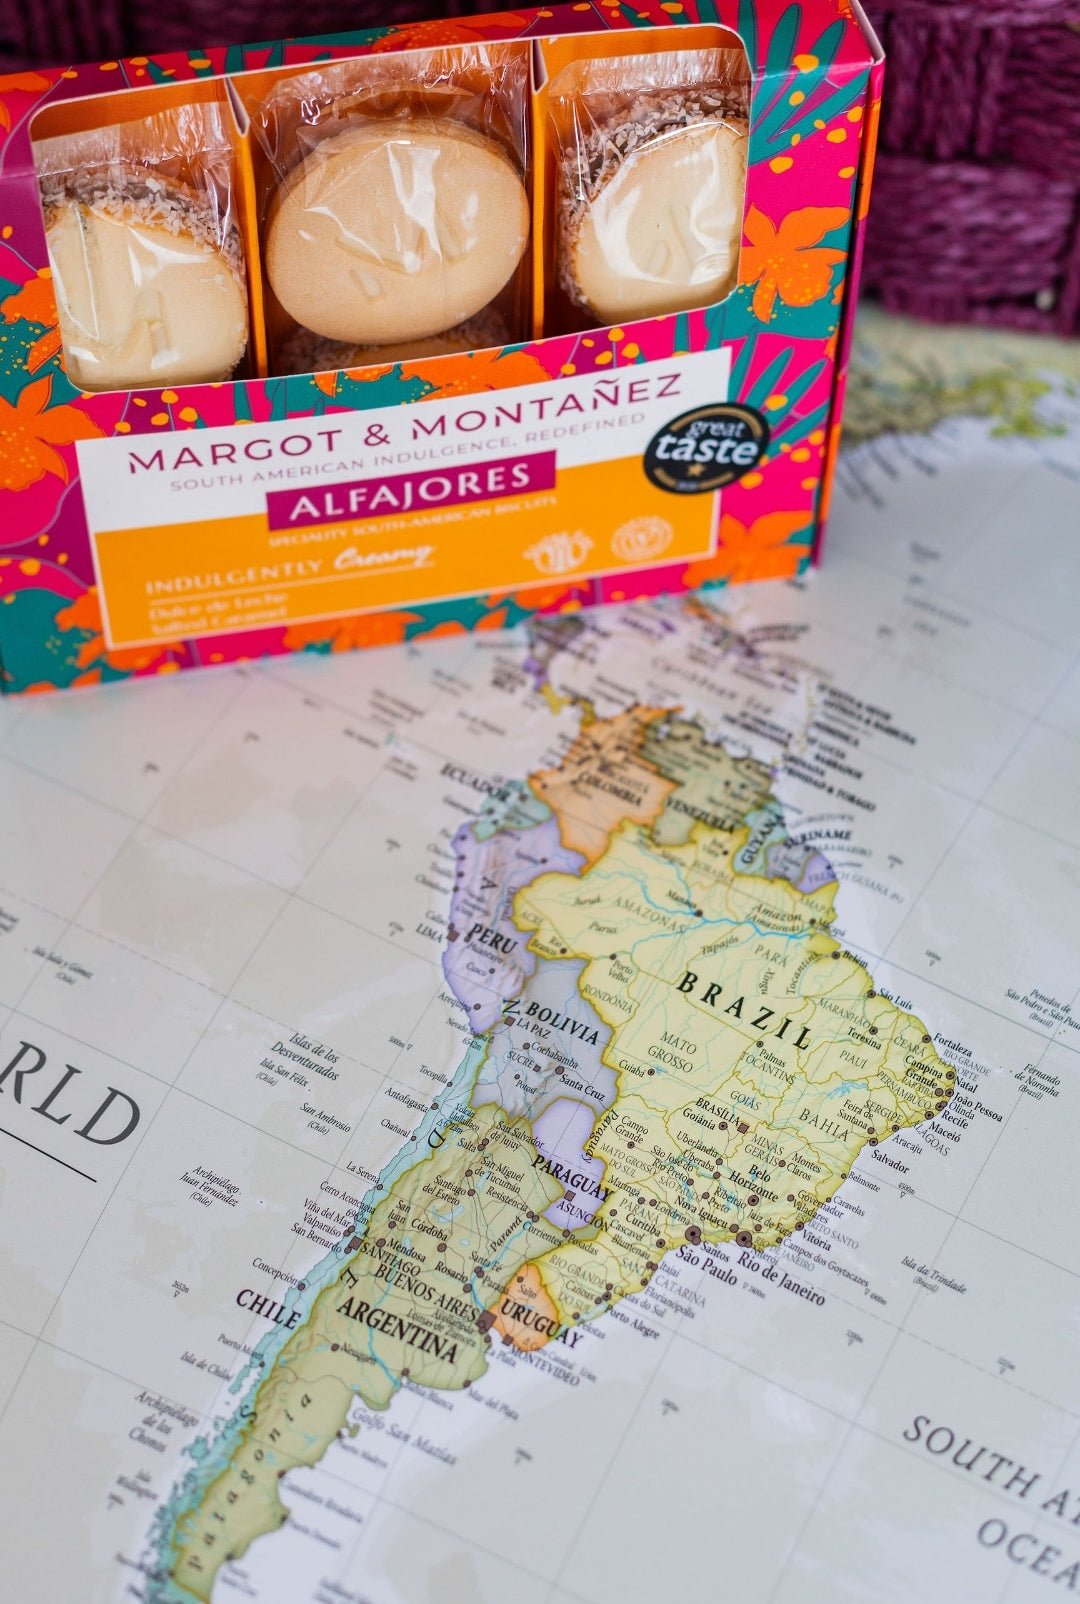 Discover the Sweet Side of South America Pop-Up Event - Margot & Montañez